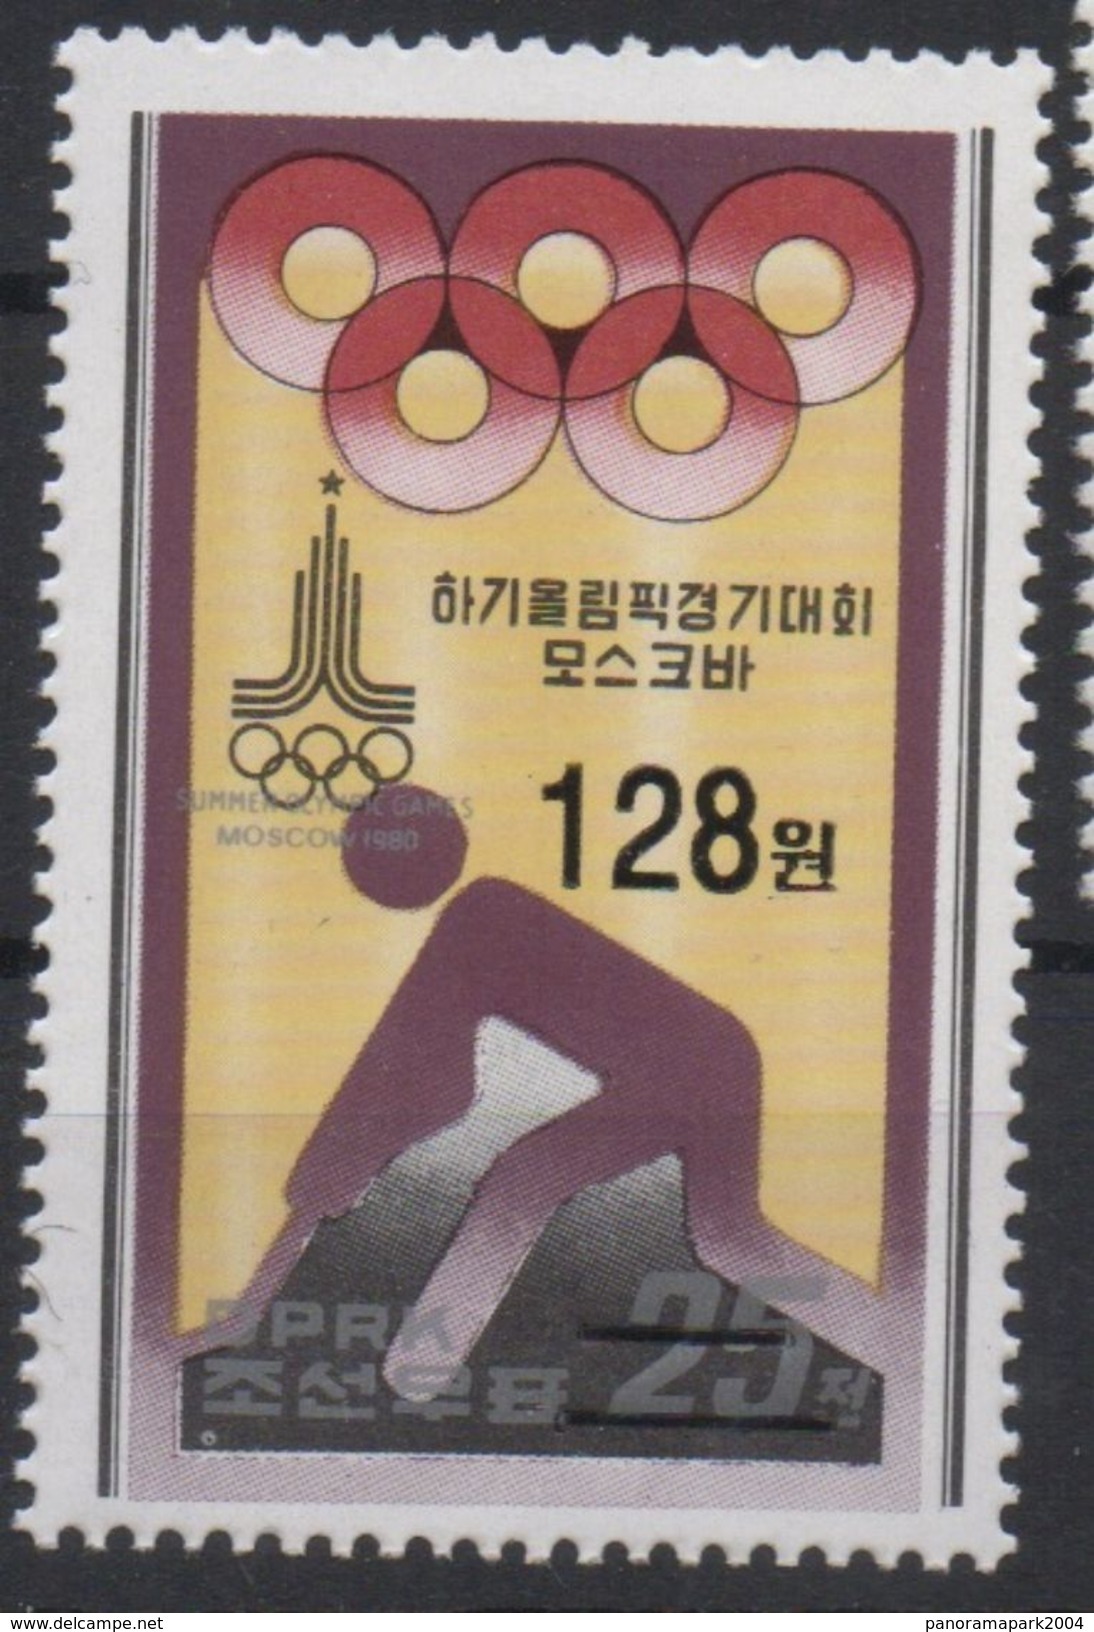 North Korea Corée Du Nord 2006 Mi. 5098 OVERPRINT Olympic Games Jeux Olympiques MOSCOW MOSCOU 1980 MOSKAU MNH** Olympia - Ete 1980: Moscou